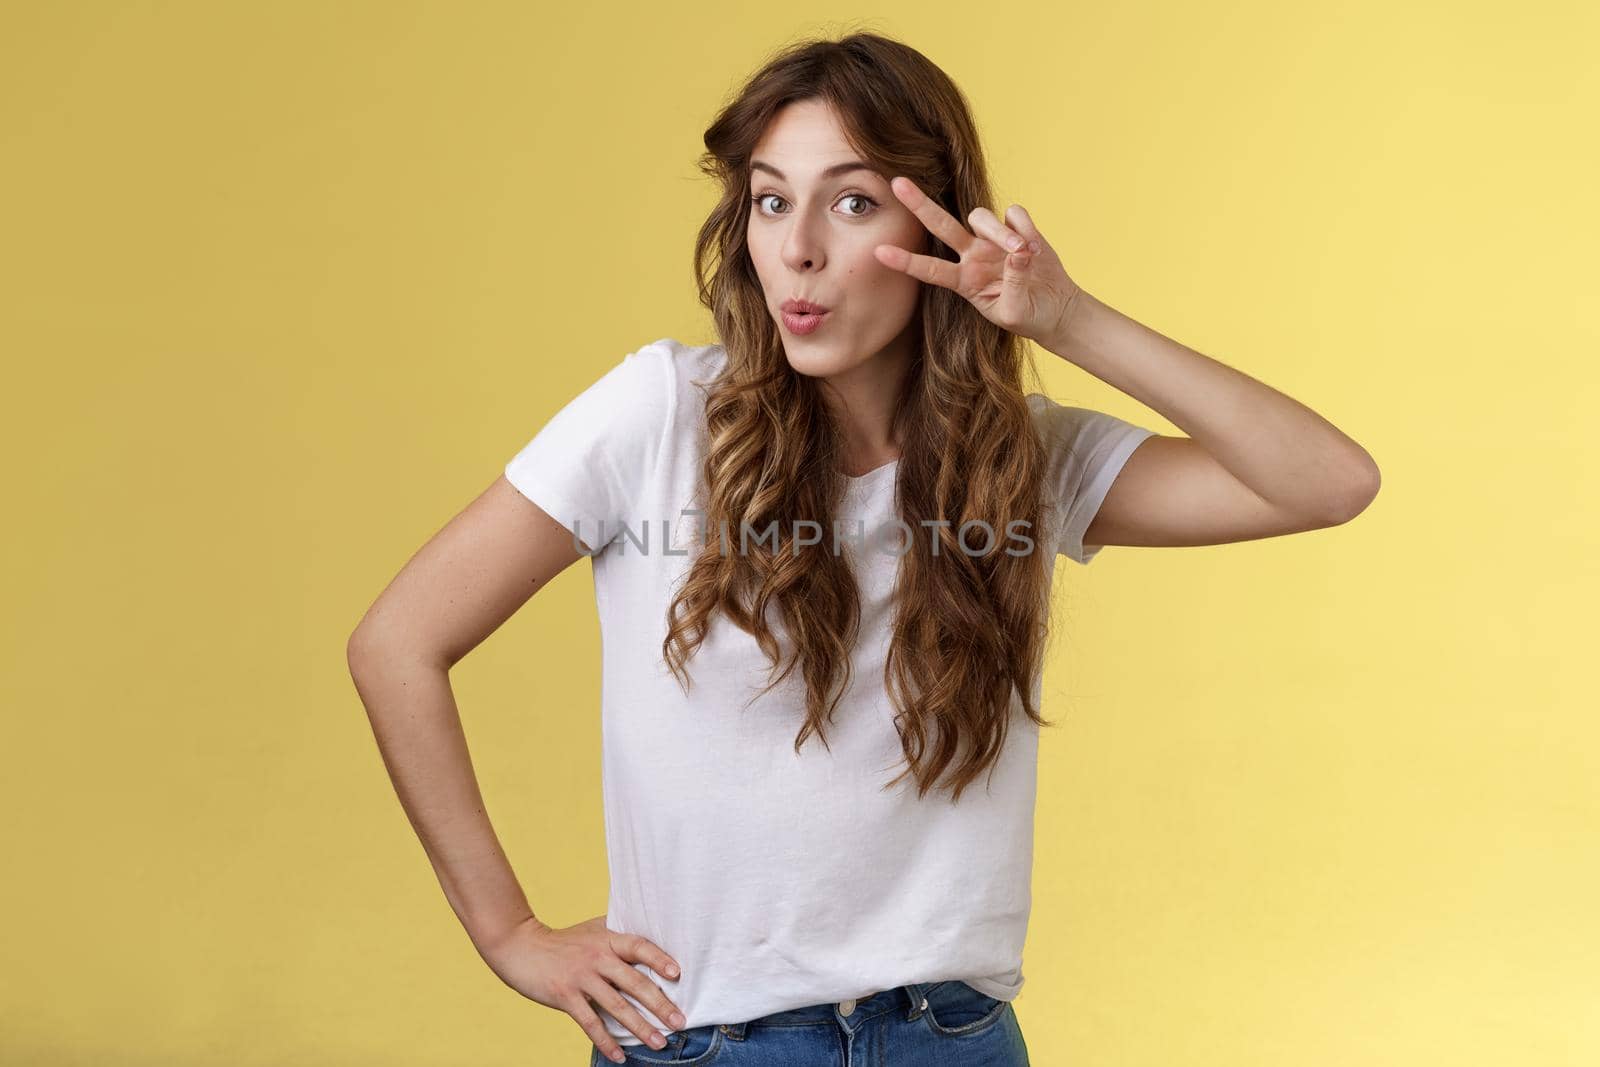 Cute glamour young woman curly haircut tilt head silly show peace victory sign fold lips lovely muah kiss gesture send flirty glances camera hold hip mimicking sensually gazing you yellow background. Lifestyle.